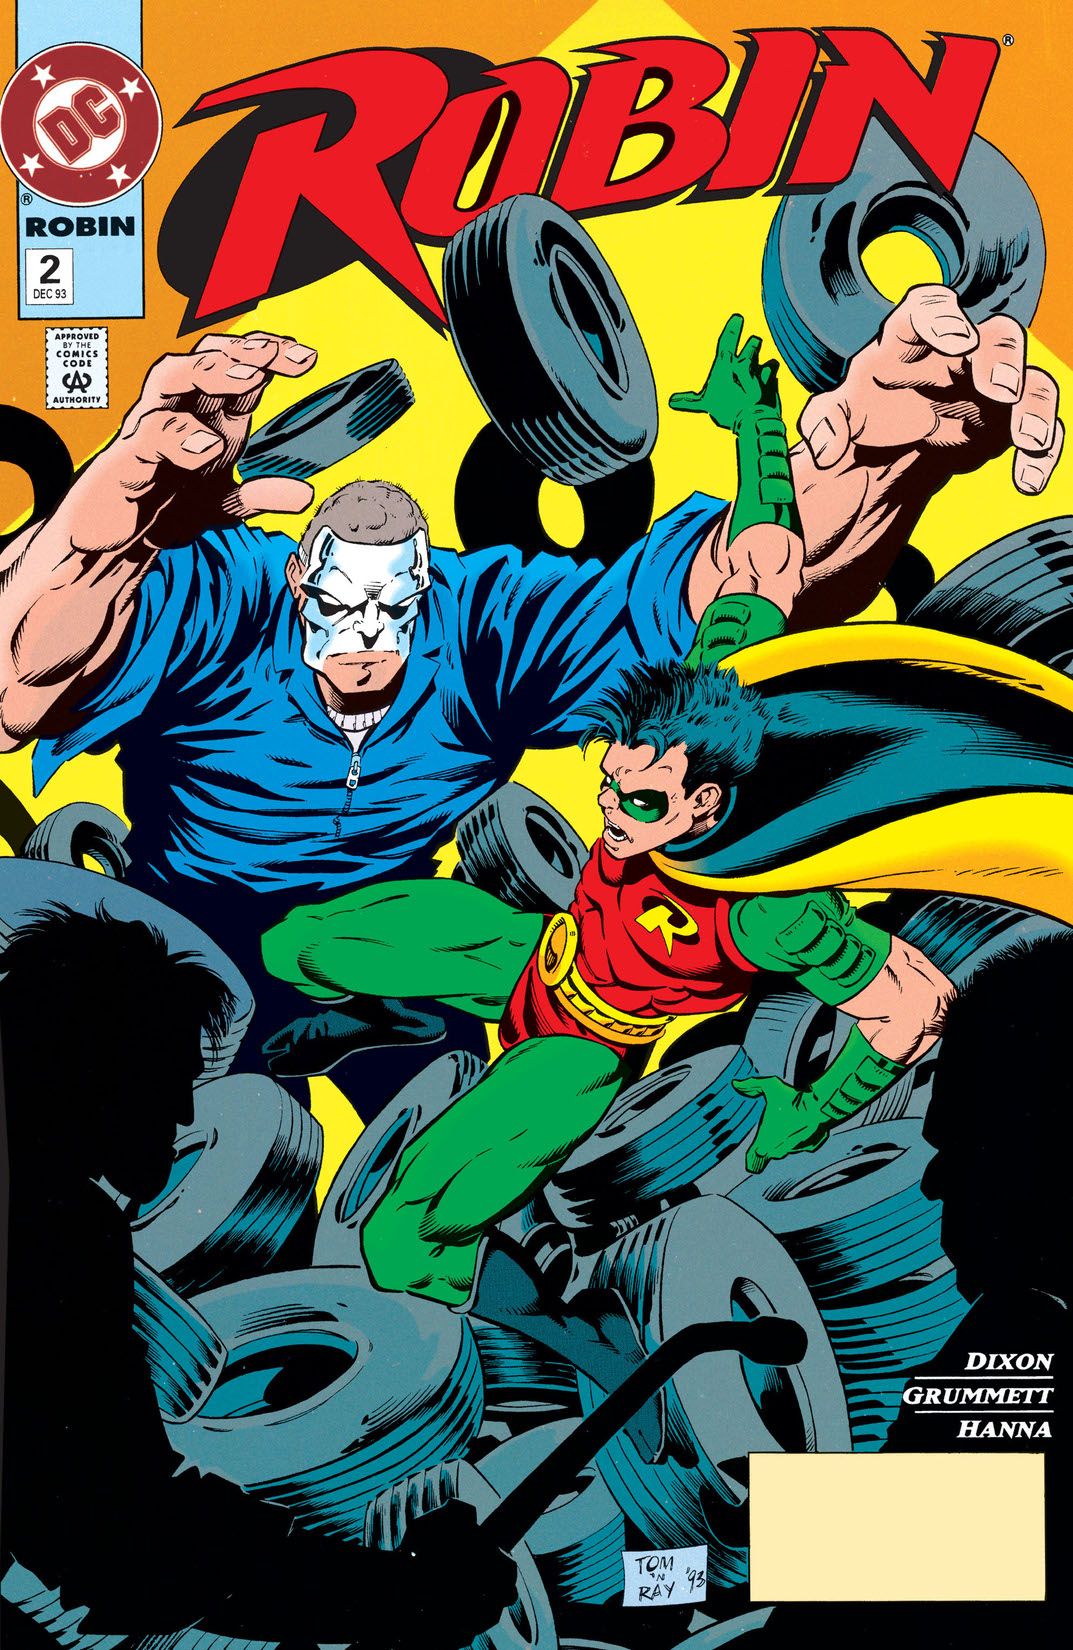 Robin (1993-2009) #2 preview images